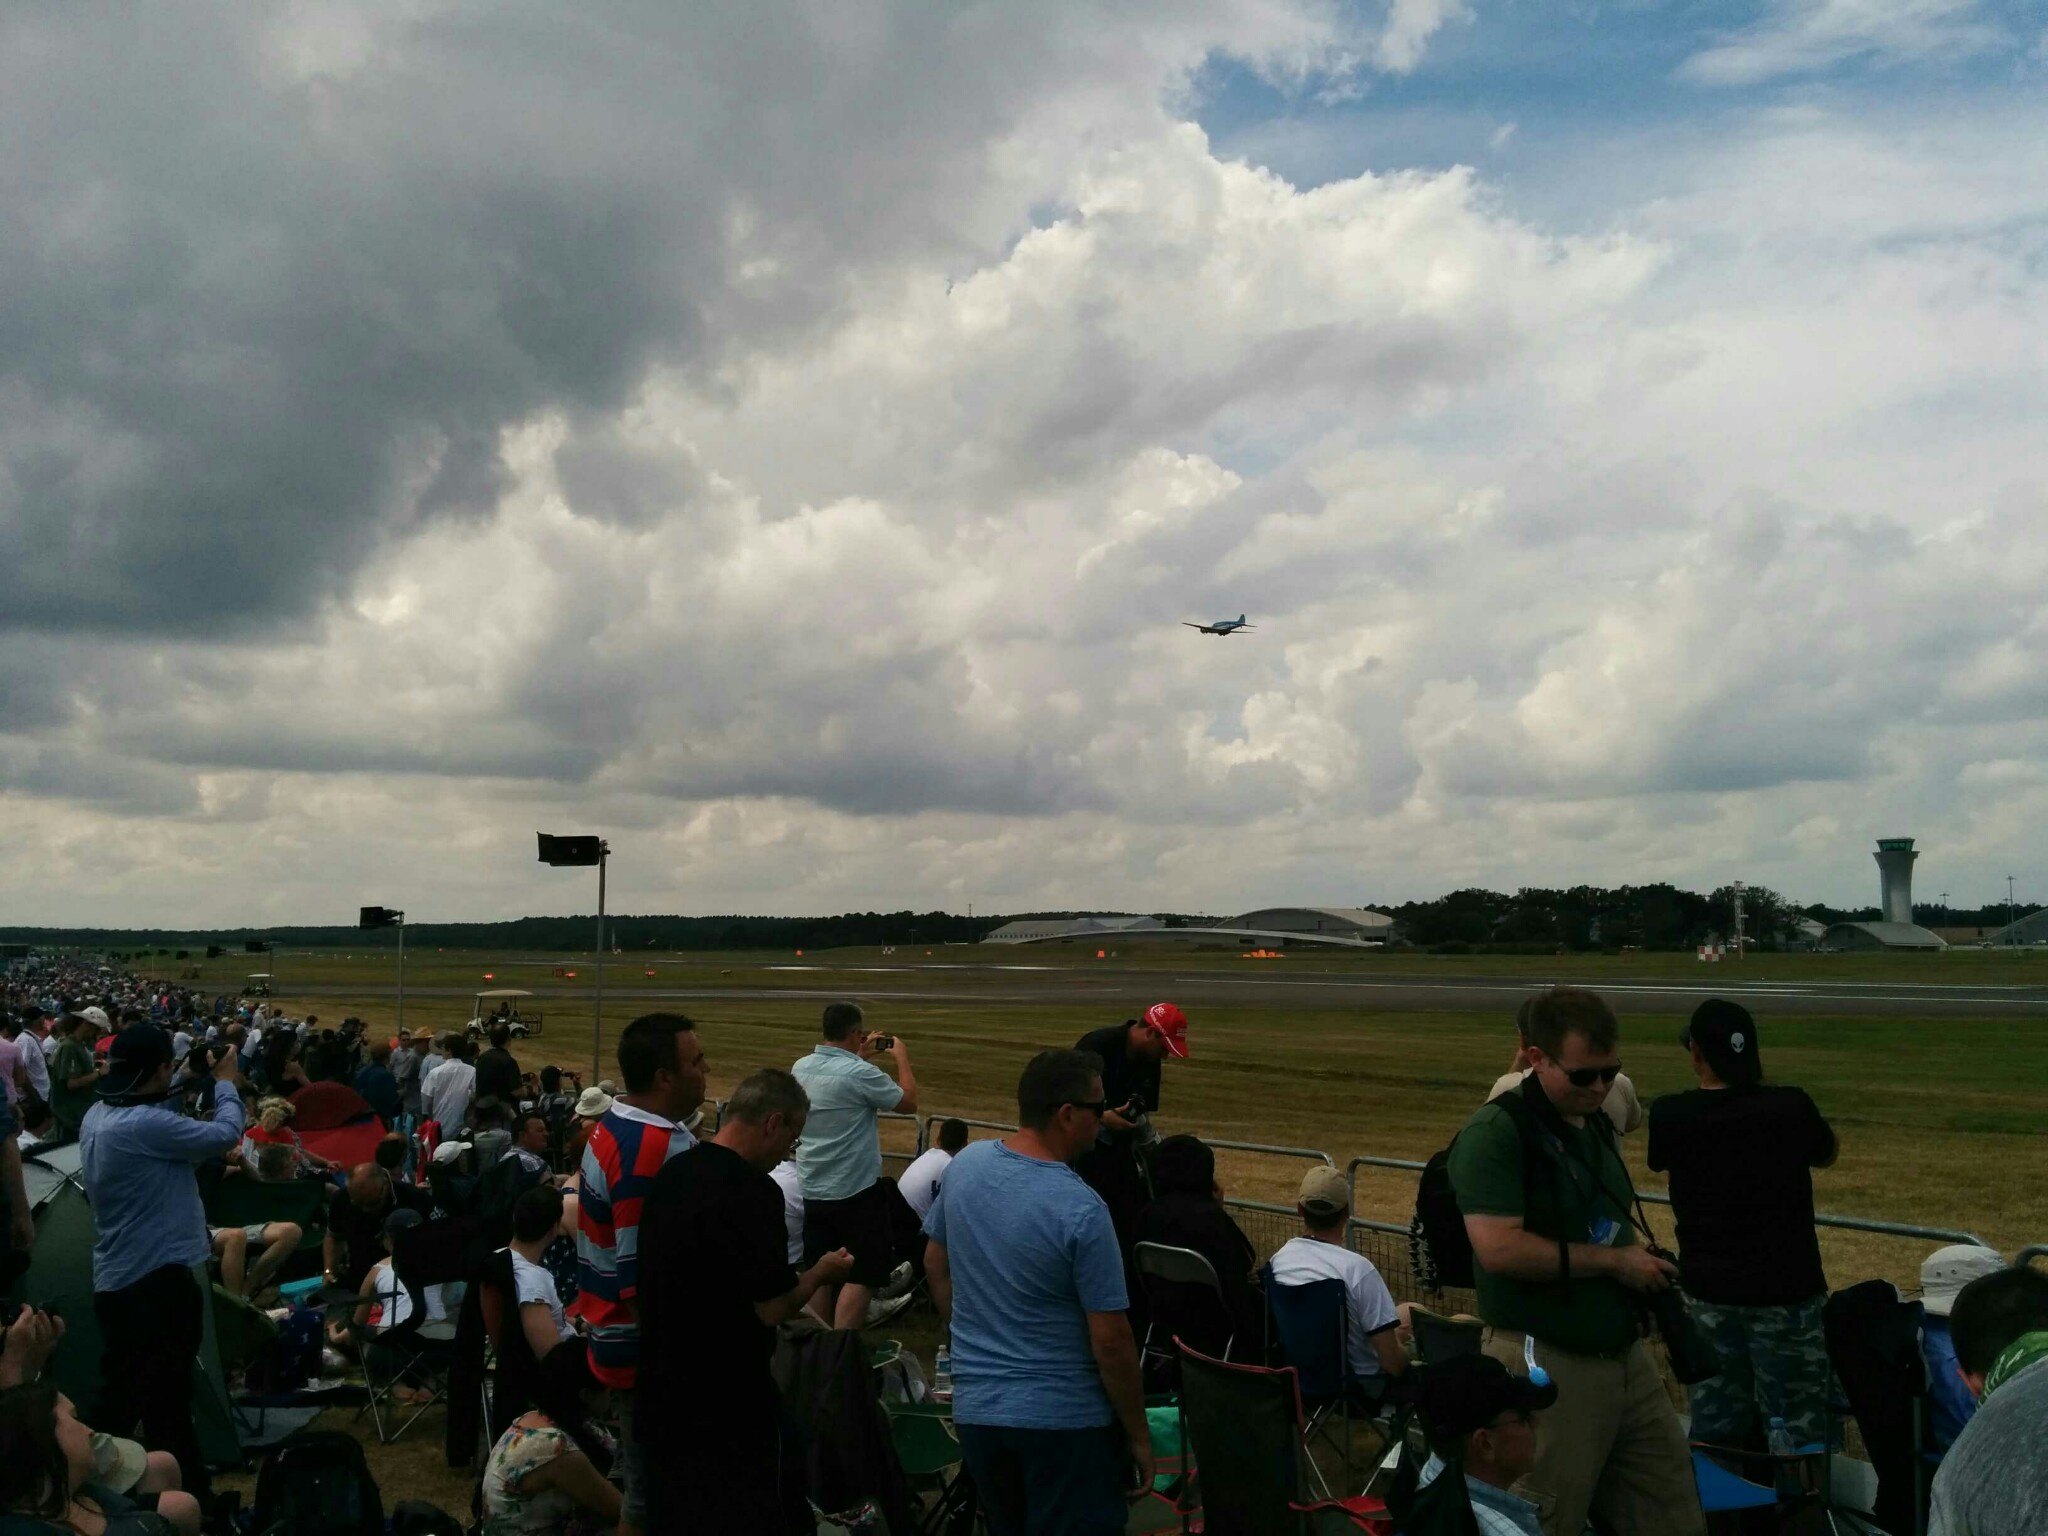 Standing 20m from the runway at Farnborough airshow. Avro Anson in the air.